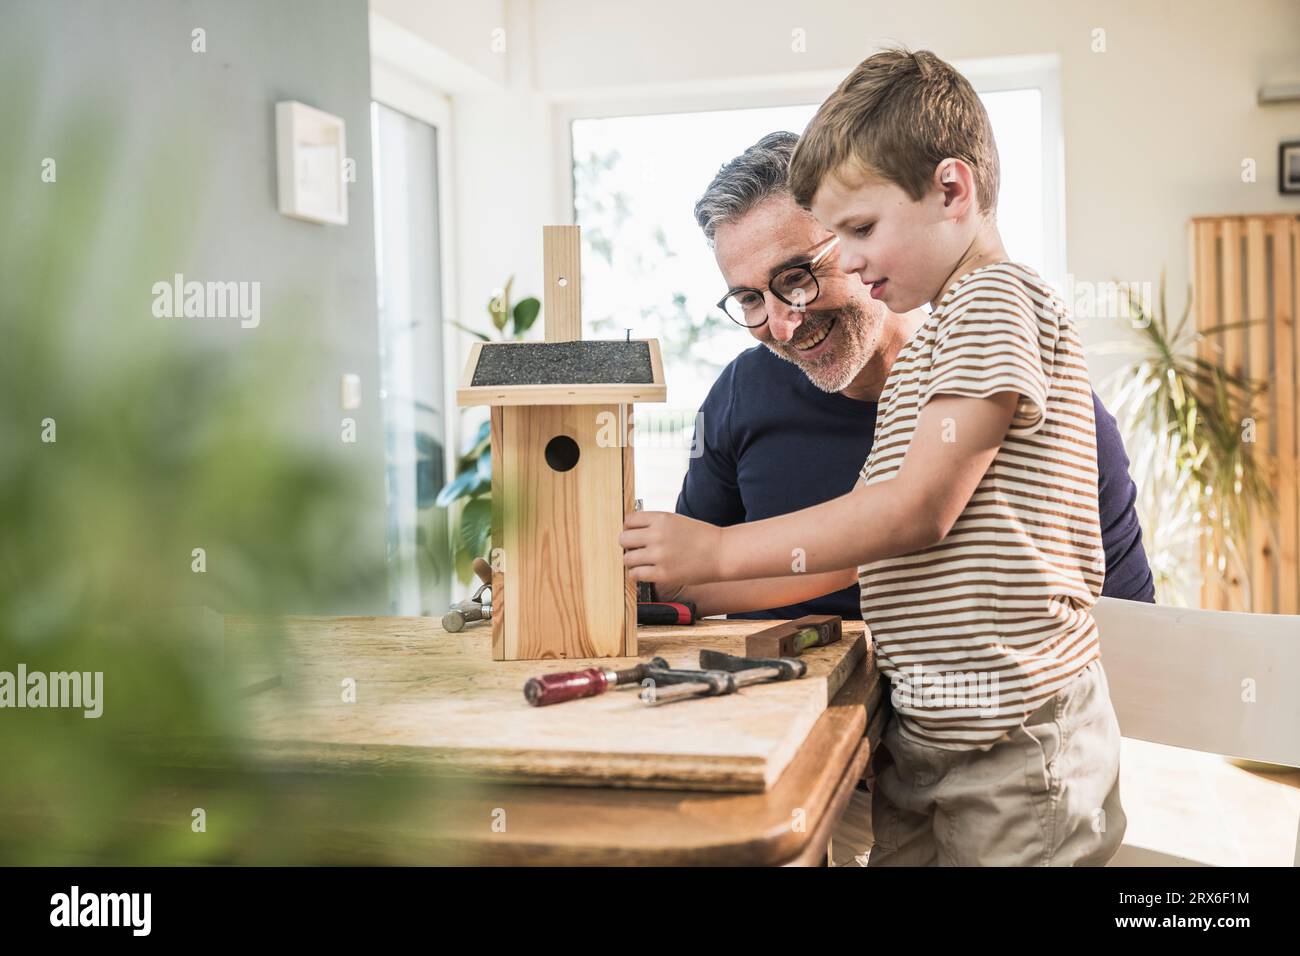 Smiling man making wooden birdhouse with grandson at home Stock Photo